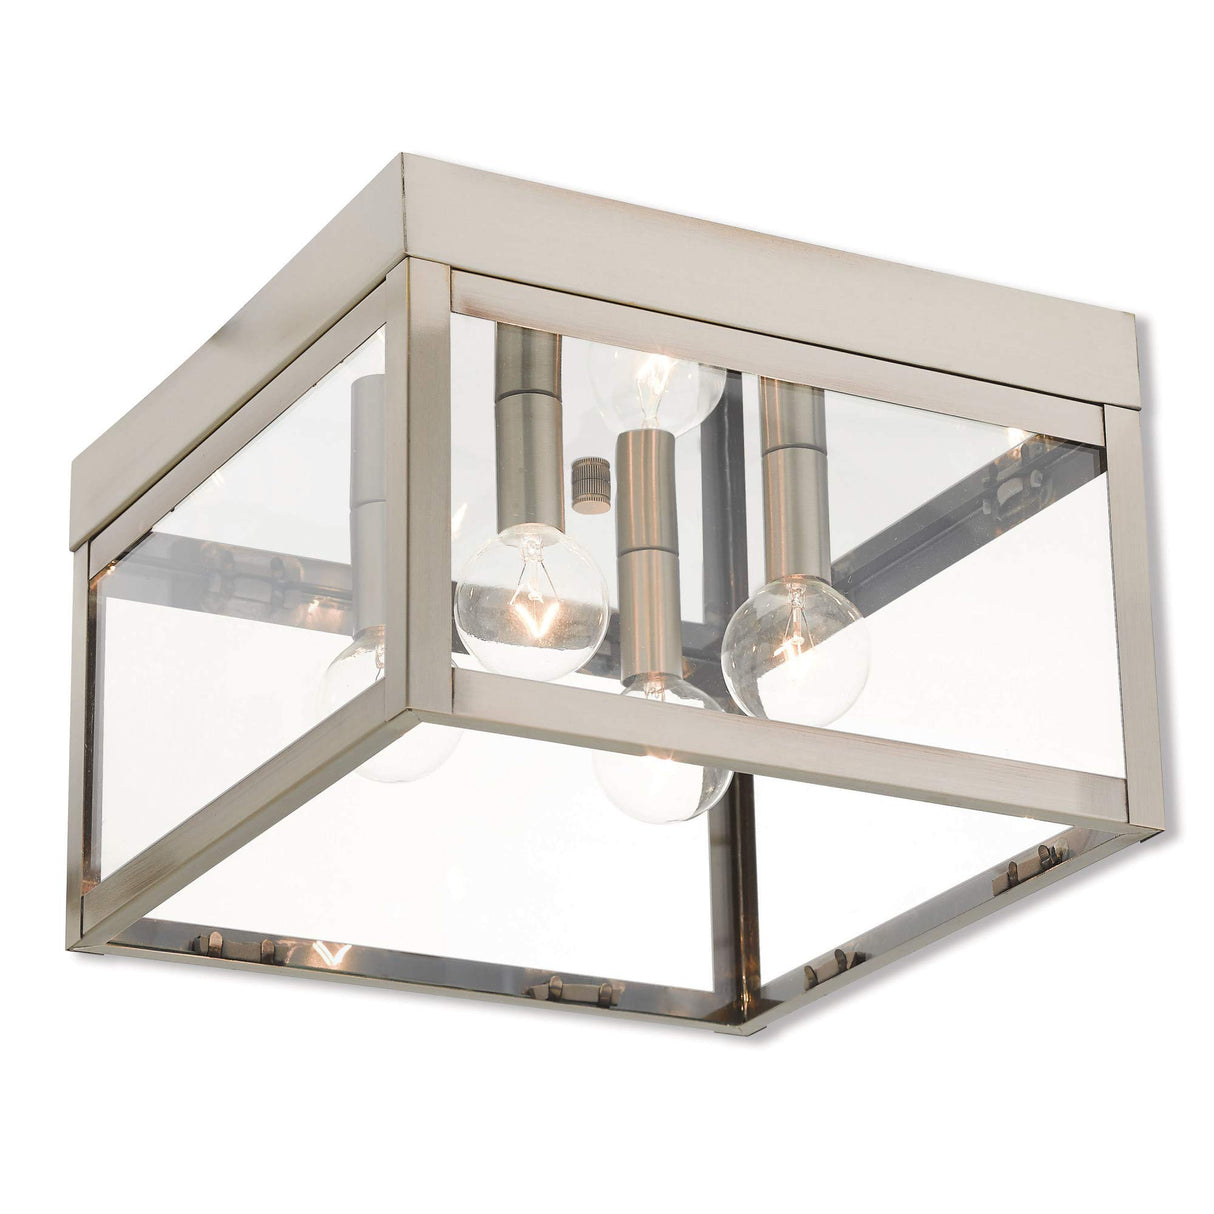 Livex Lighting 20589-91 Transitional Four Light Outdoor Ceiling Mount from Nyack Collection in Pwt, Nckl, B/S, Slvr. Finish, 10.50 inches, Medium, Brushed Nickel